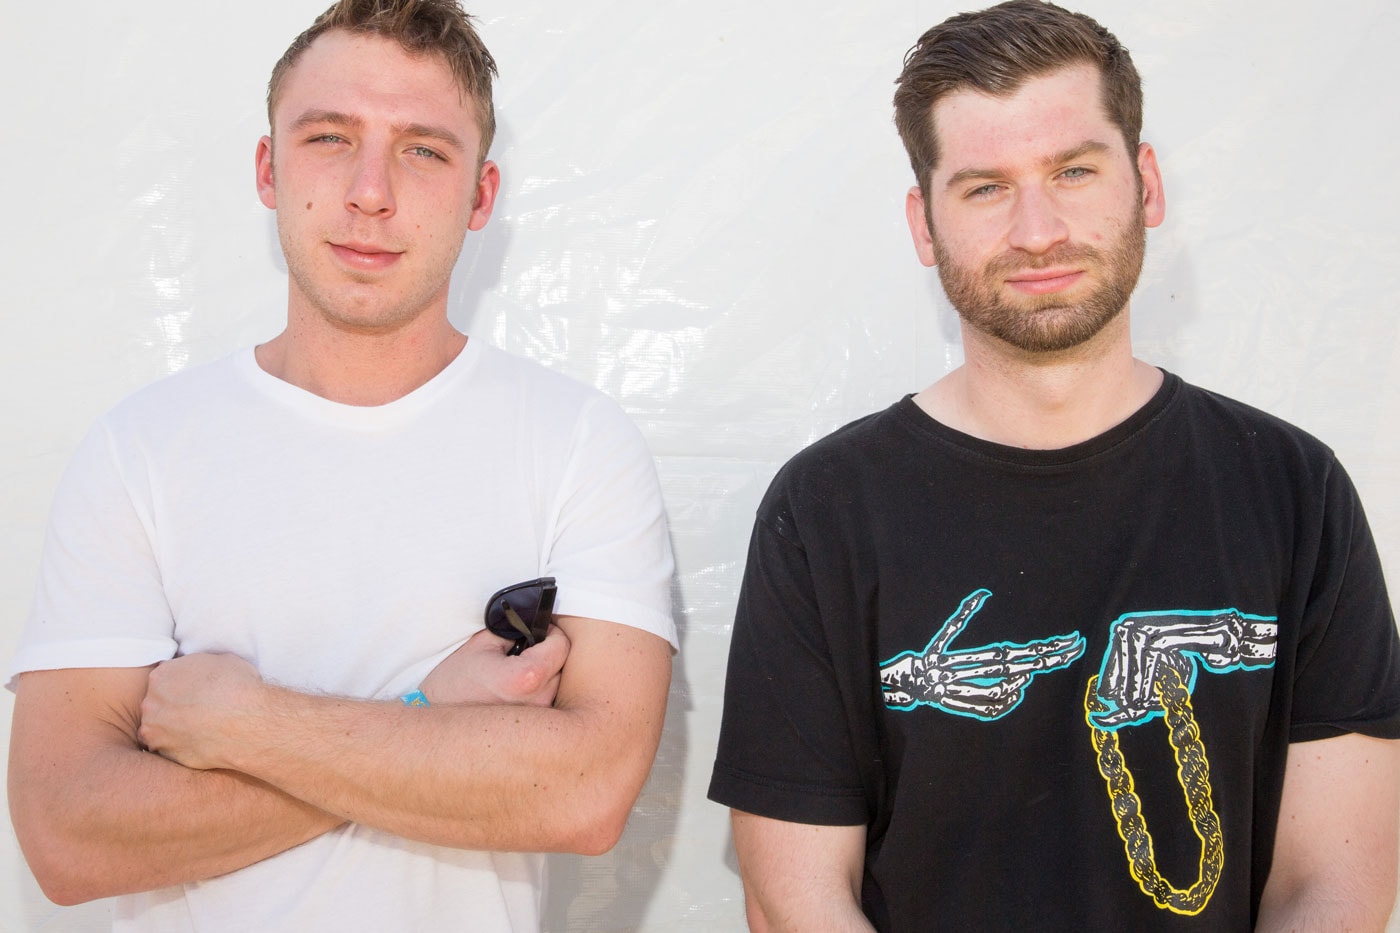 Listen to ODESZA's Mix for Diplo & Friends